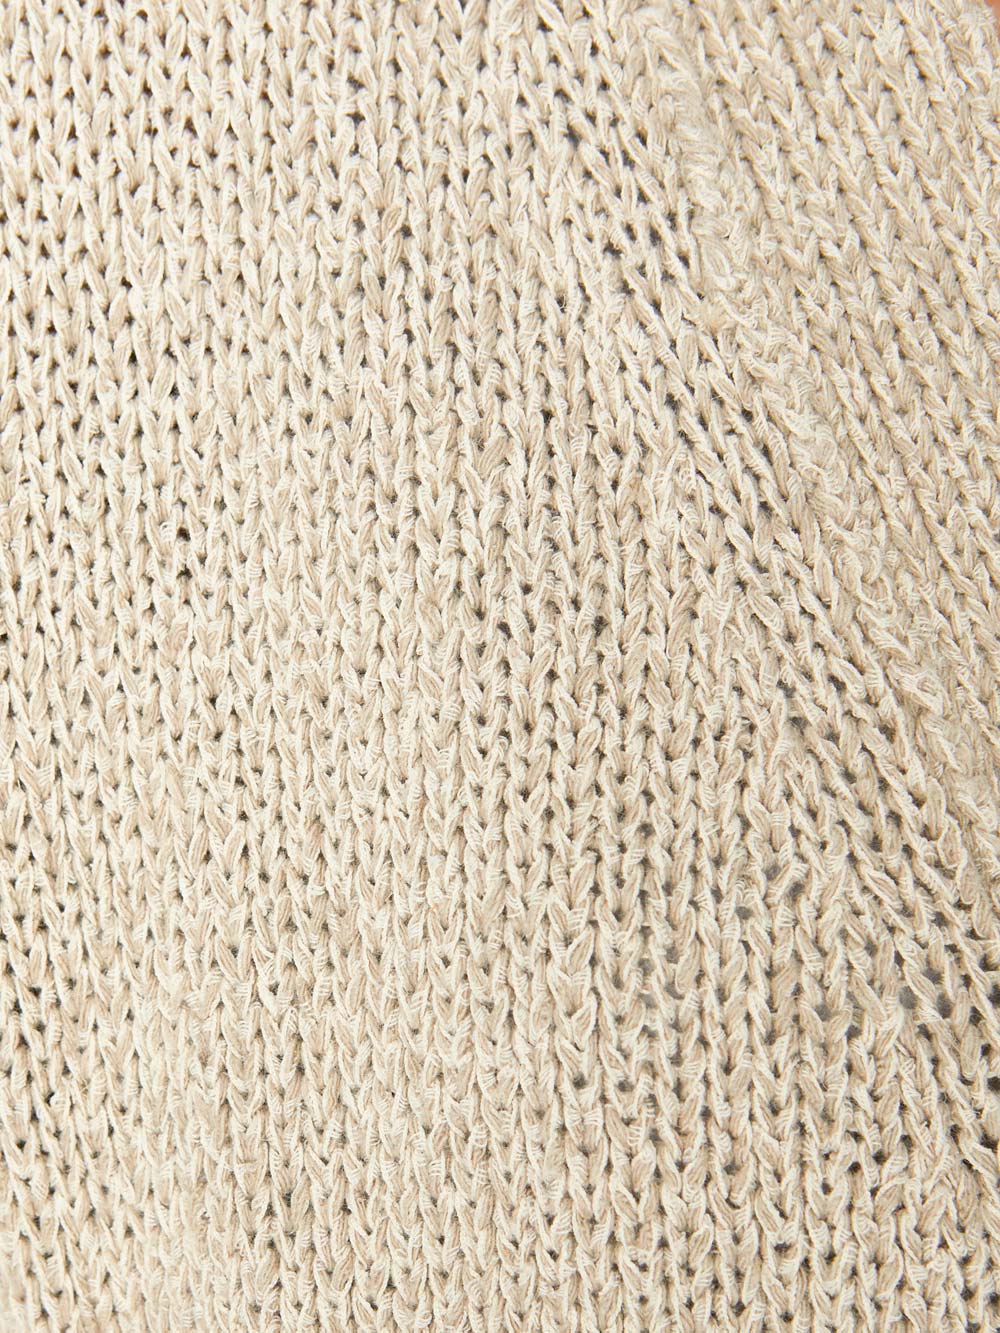 Cropped beige linen cotton cardigan sweater close up 2